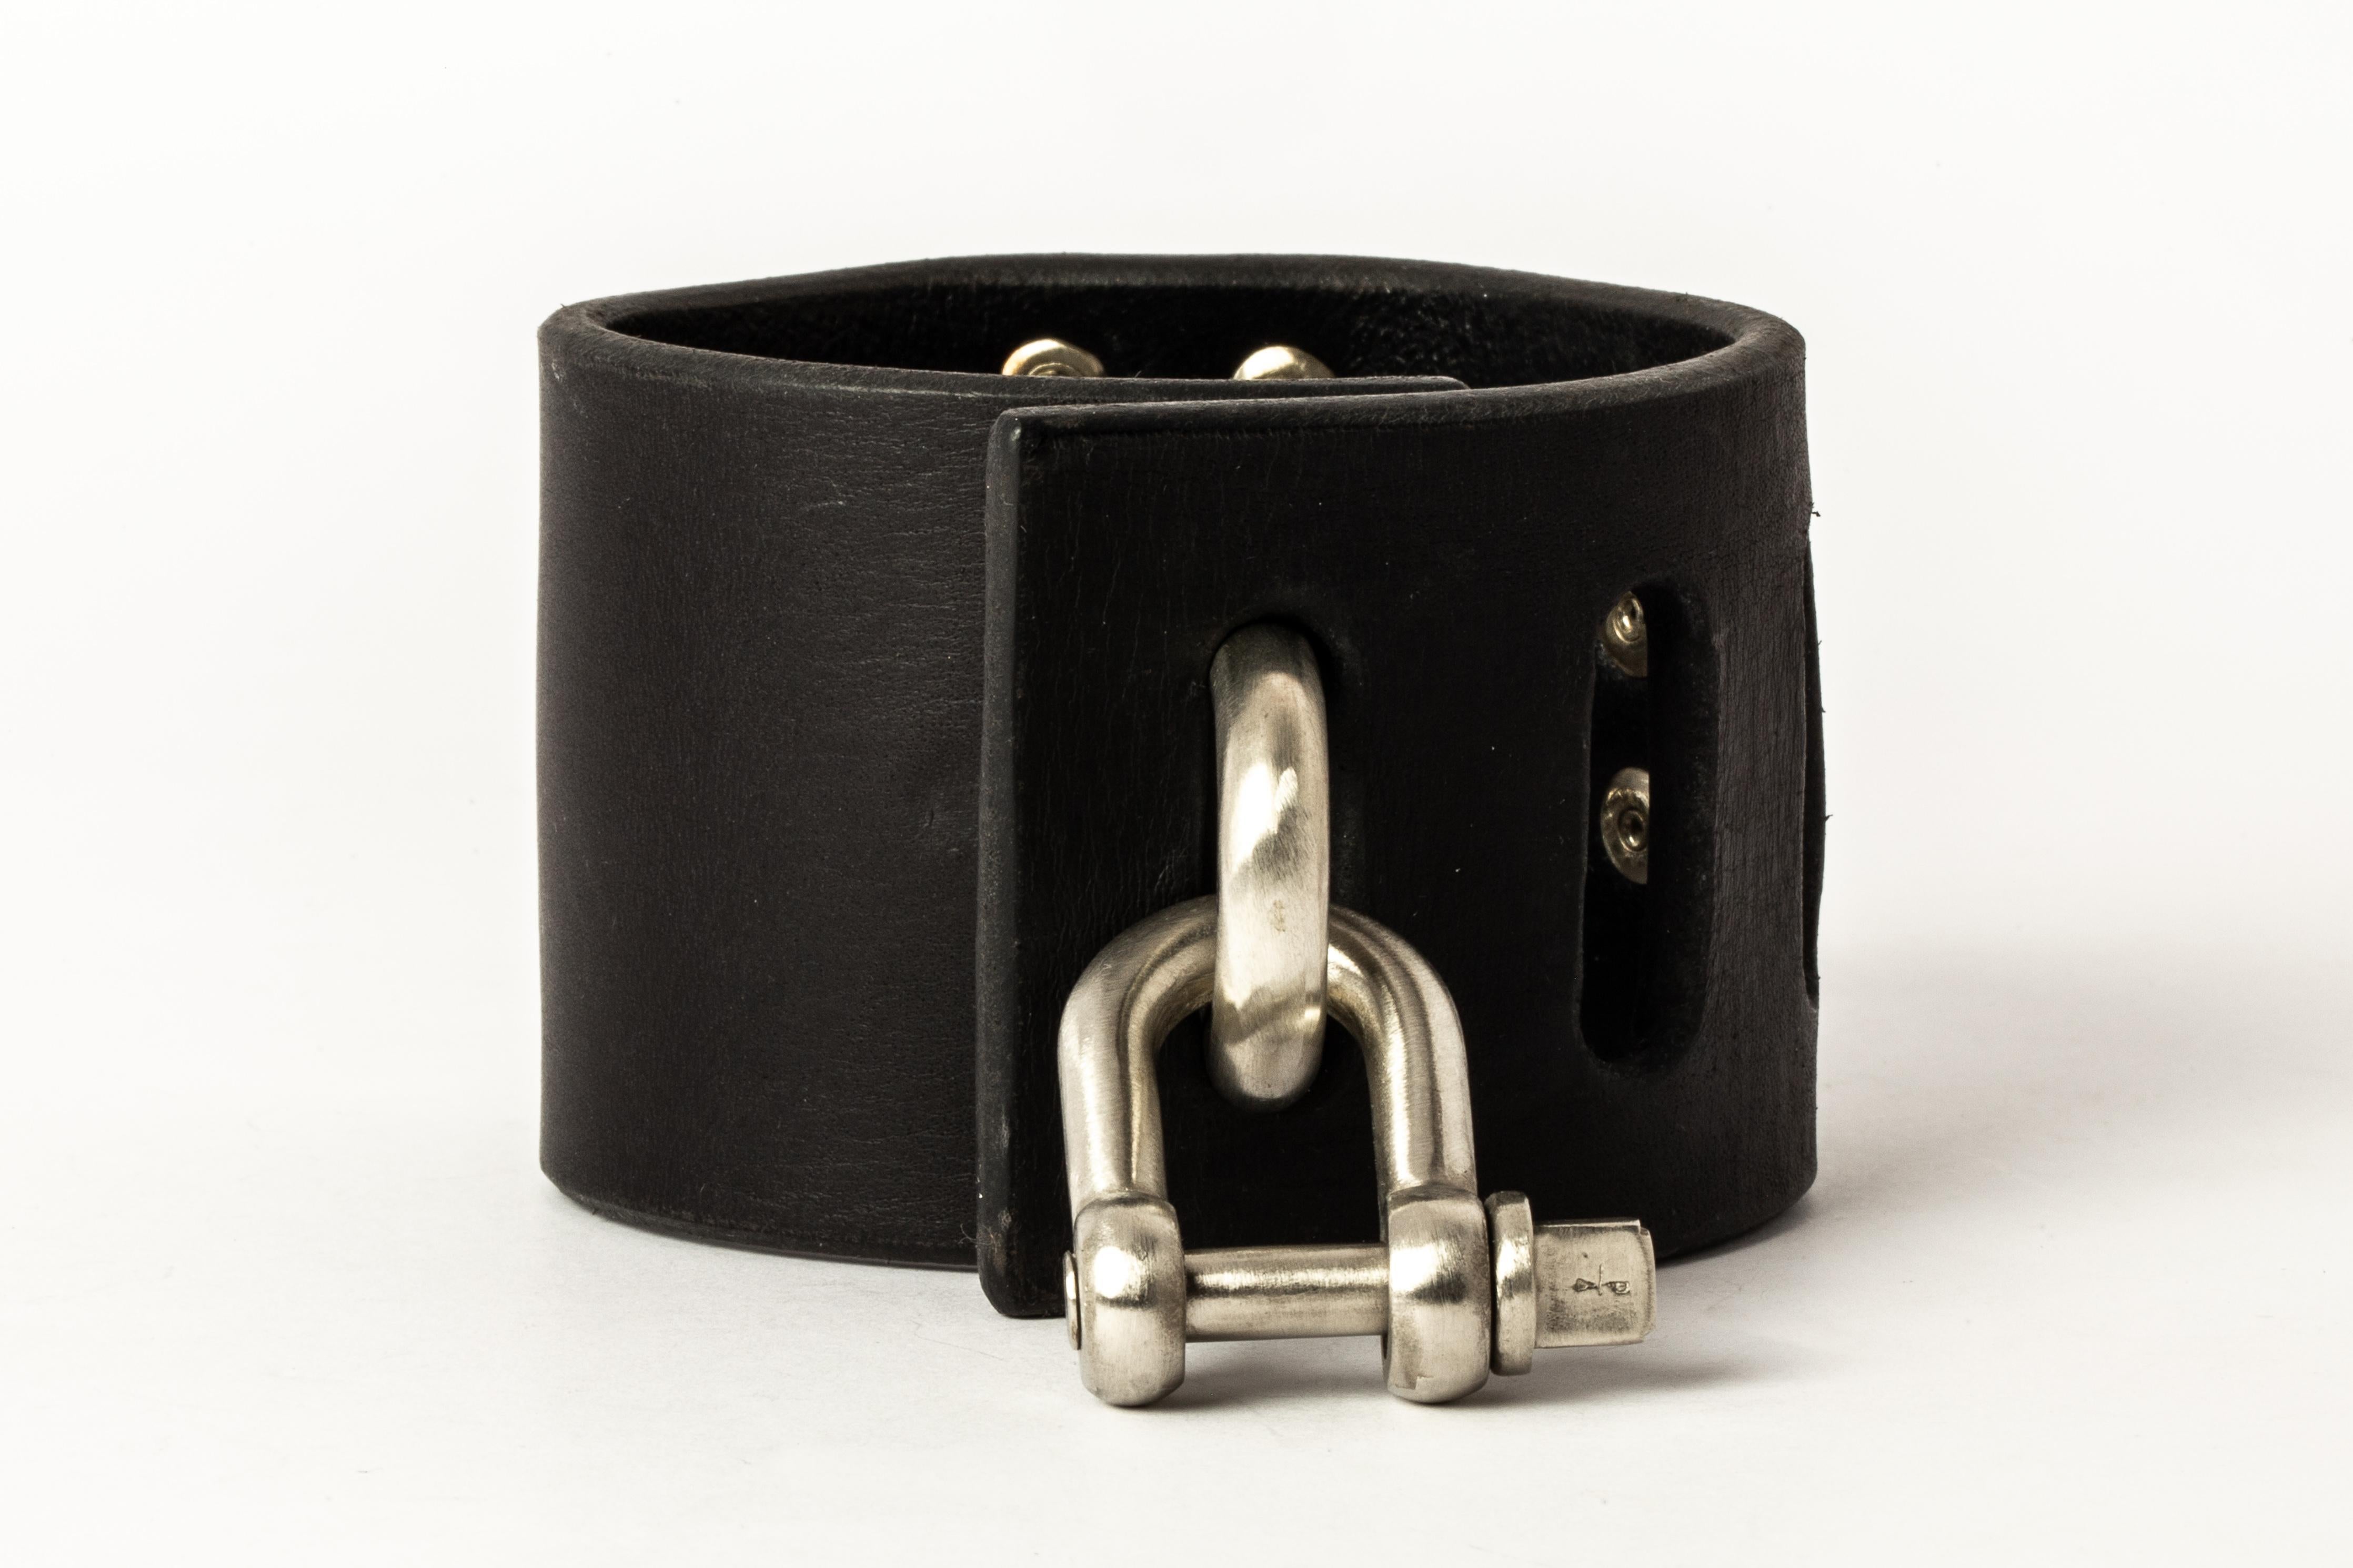 Bracelet in black buffalo leather and white bronze. Items with the potential use as restraints. All P4X hardware and accessories are compatible and interchangeable.
The Charm System is an interrelated group of products that can be mixed and matched